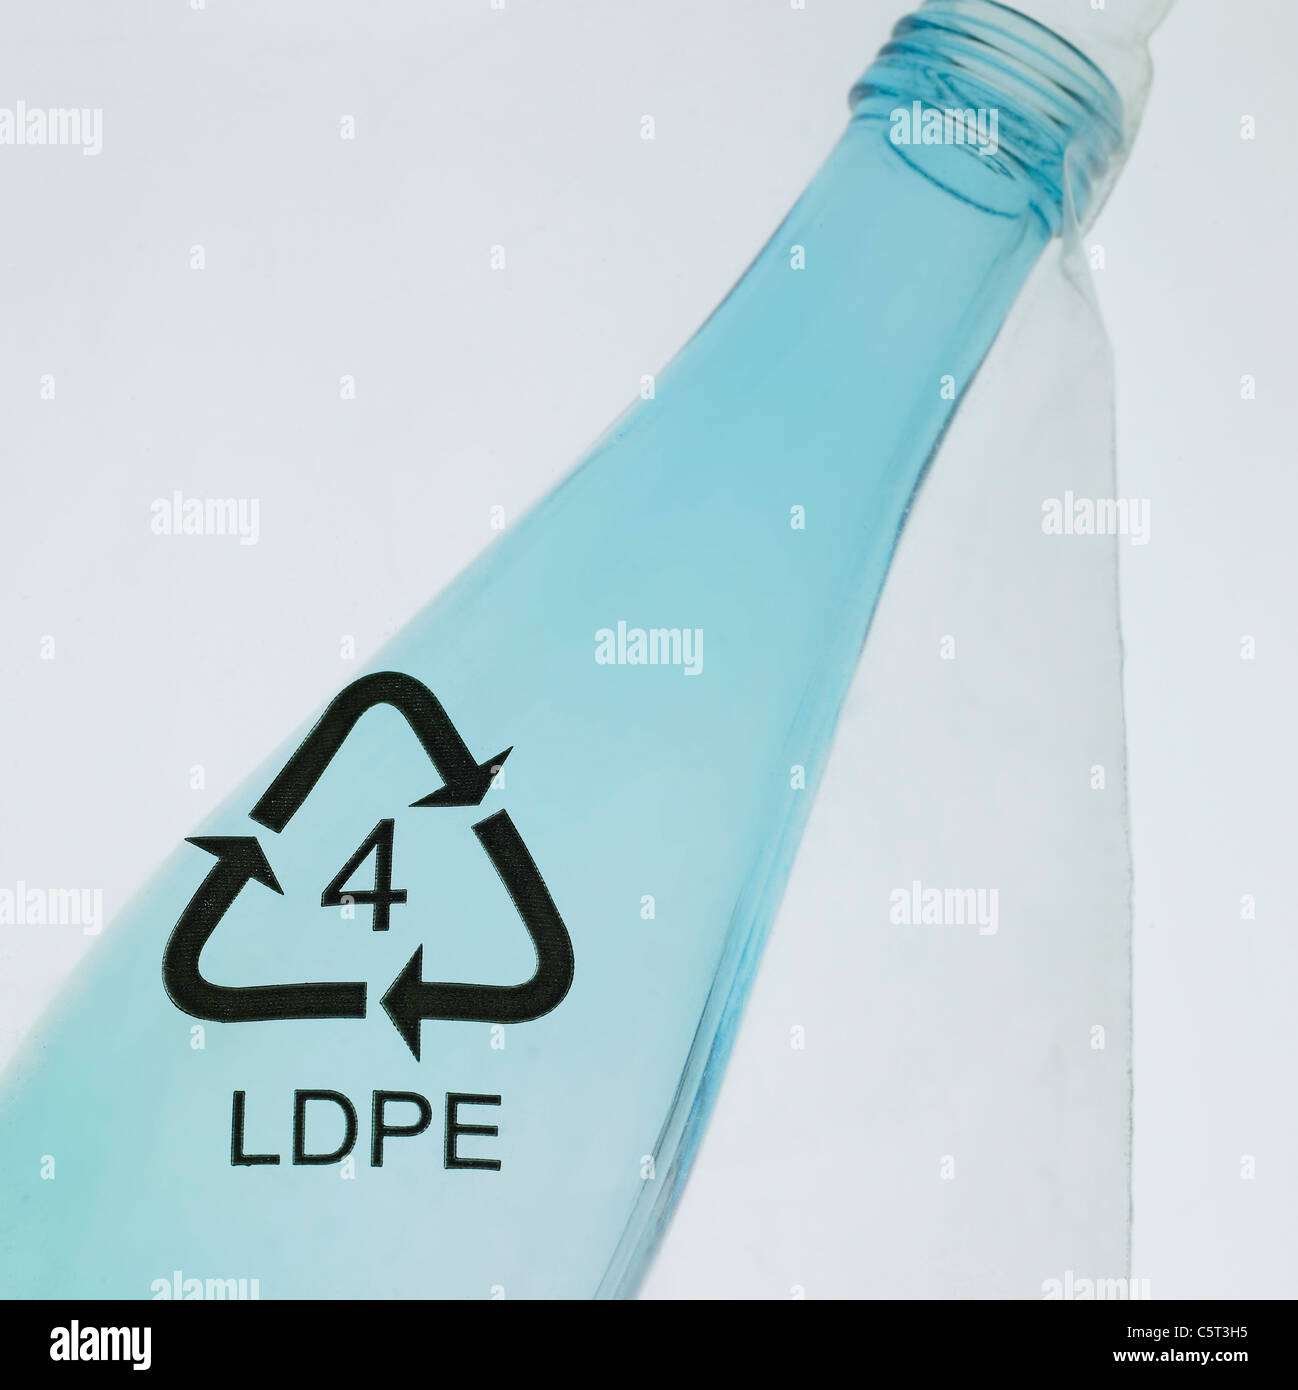 Glass bottle in a plastic bag Stock Photo